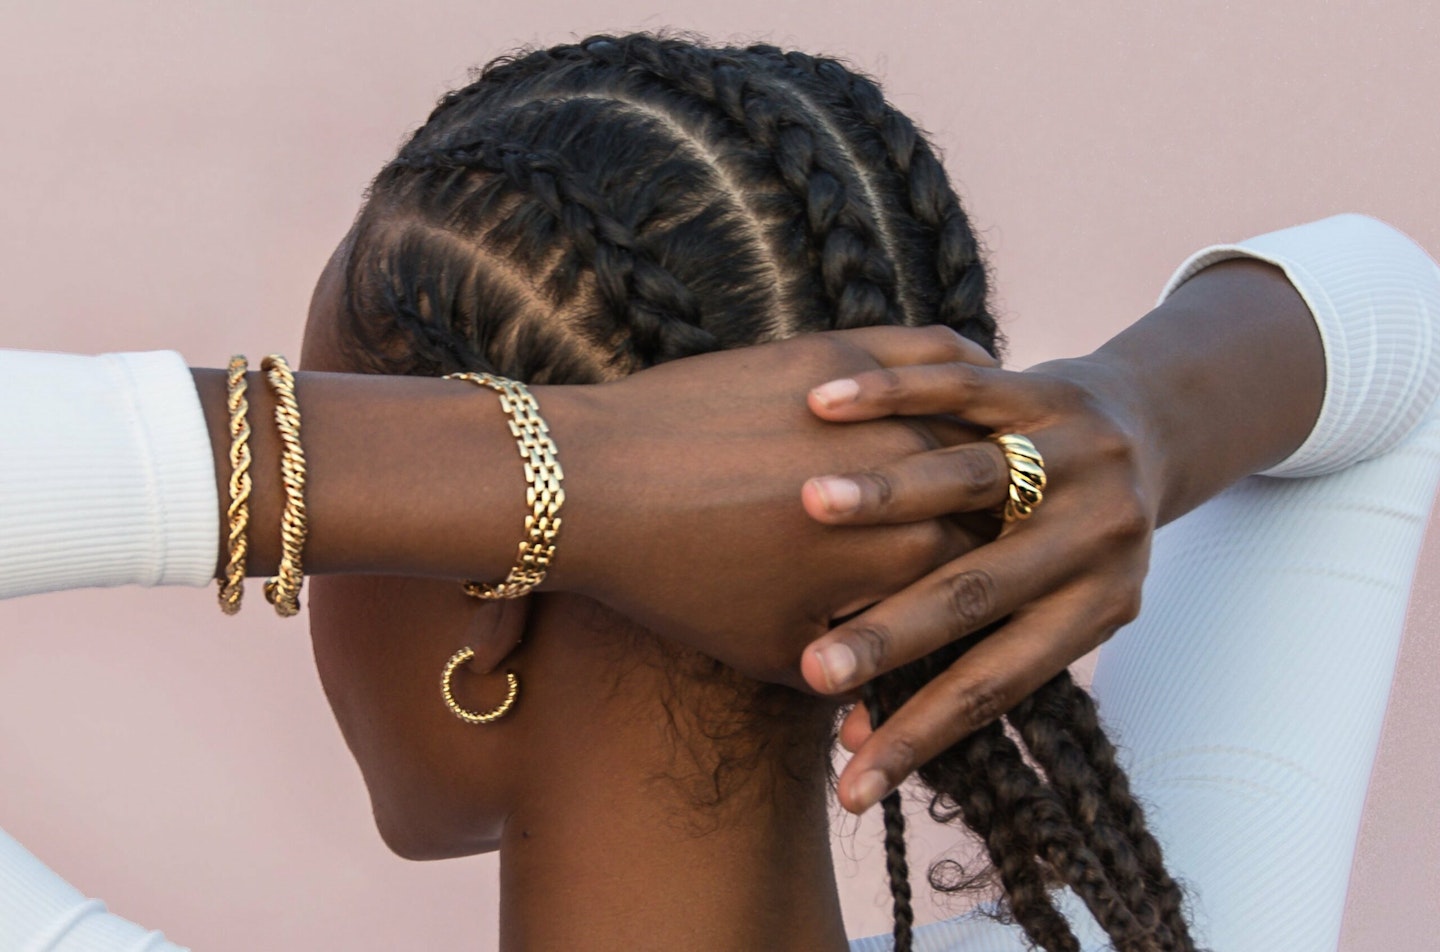 Black owned jewellery brands